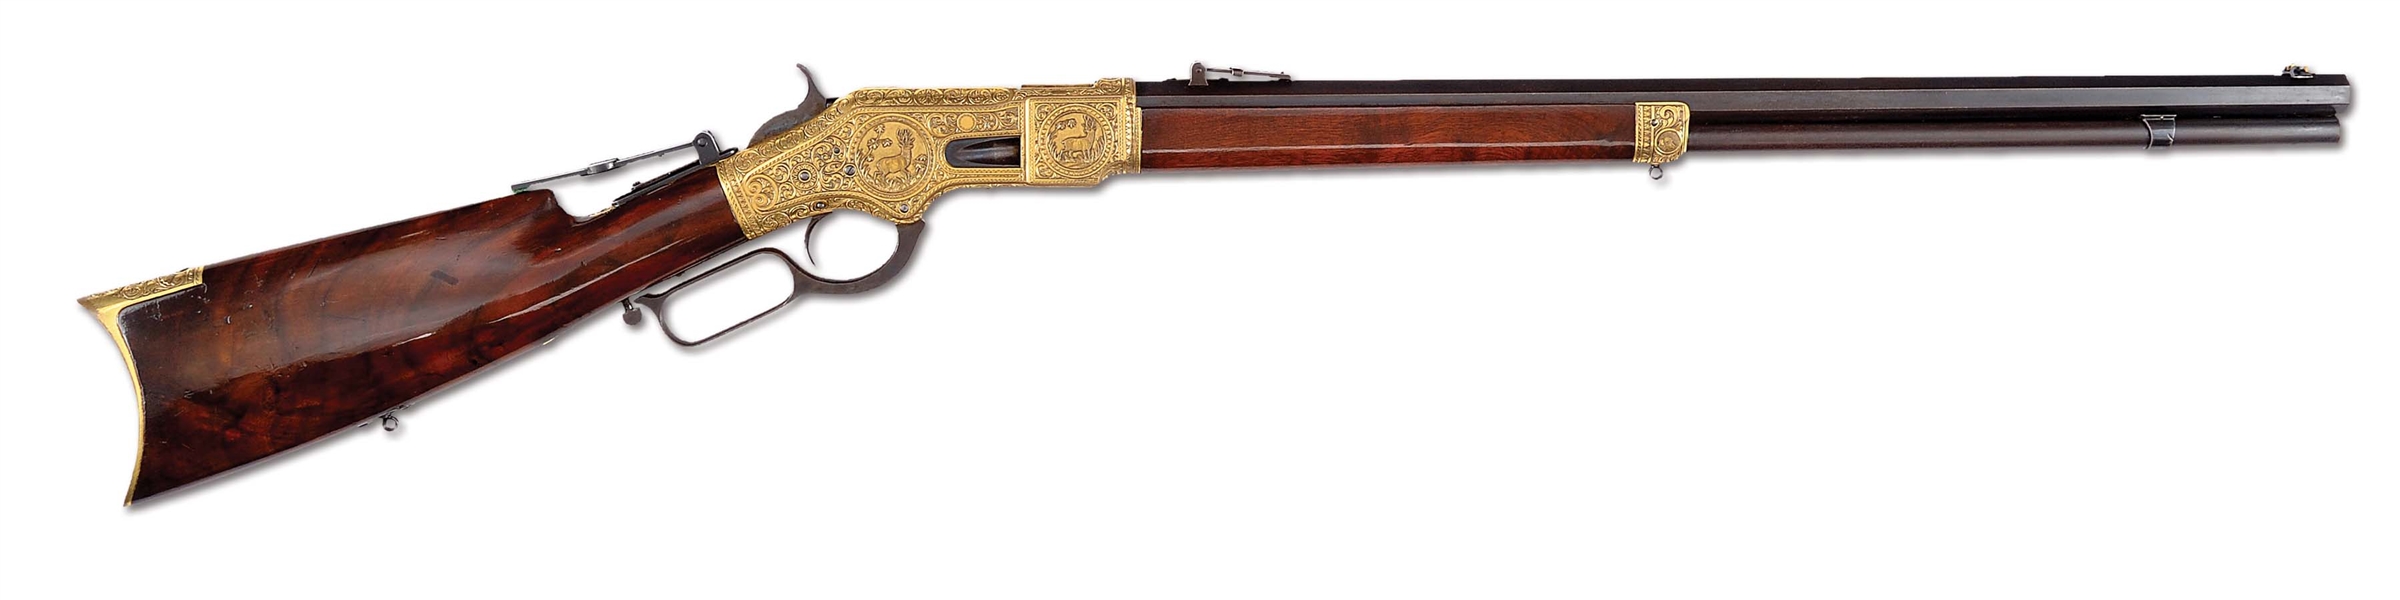 (A) FABULOUS WINCHESTER MODEL 1866 RIFLE DEEP RELIEF ENGRAVED WITH GOLD PLATING (1872).